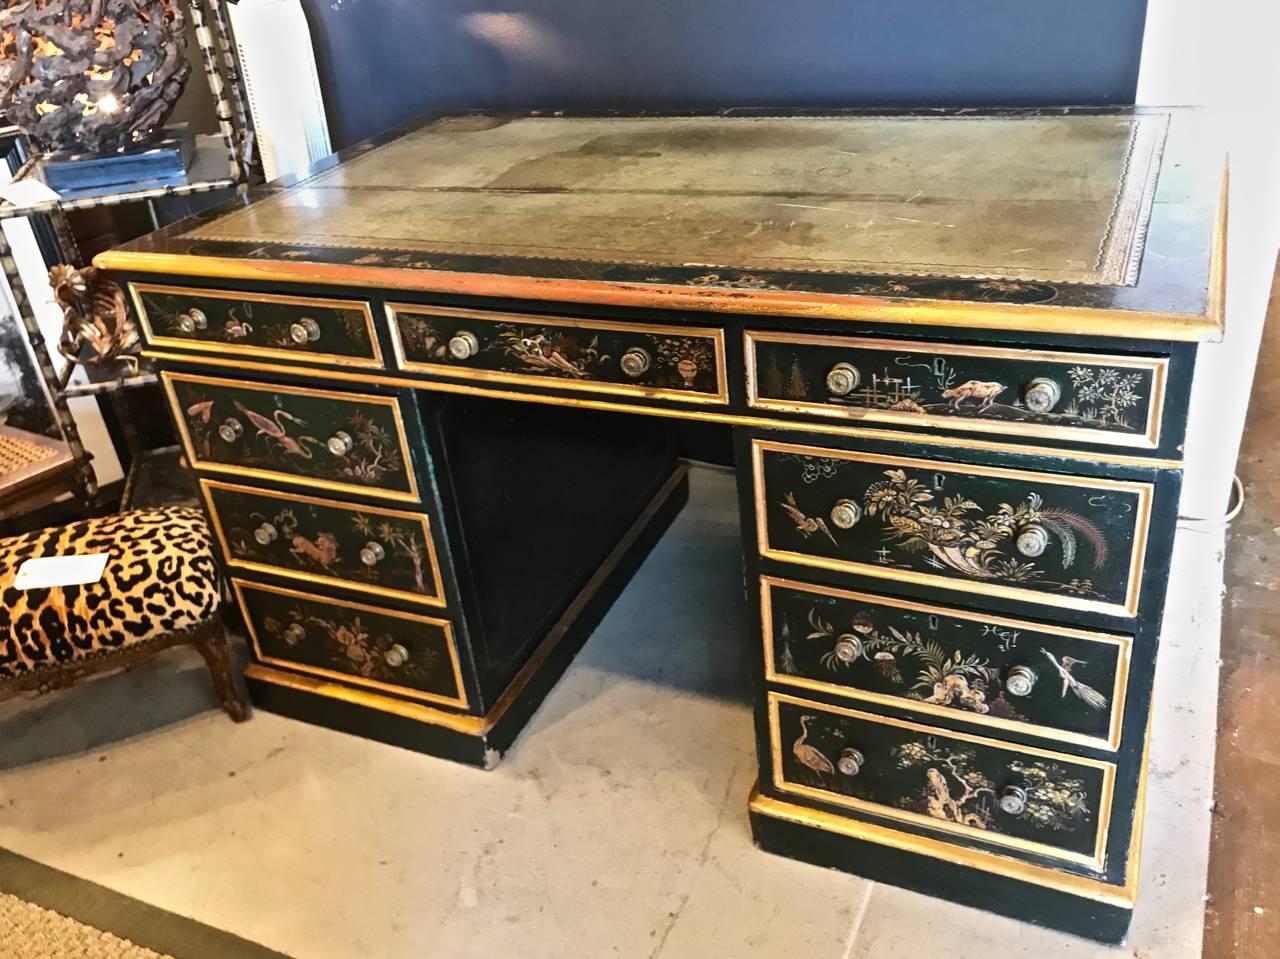 Superb double pedestal three-part Japanned desk. The desk is a faux partners desk dating from the early to mid-19th century. It features original detailed raised Chinoiserie decoration, the gilt edges have been refreshed. The faux drawers on the